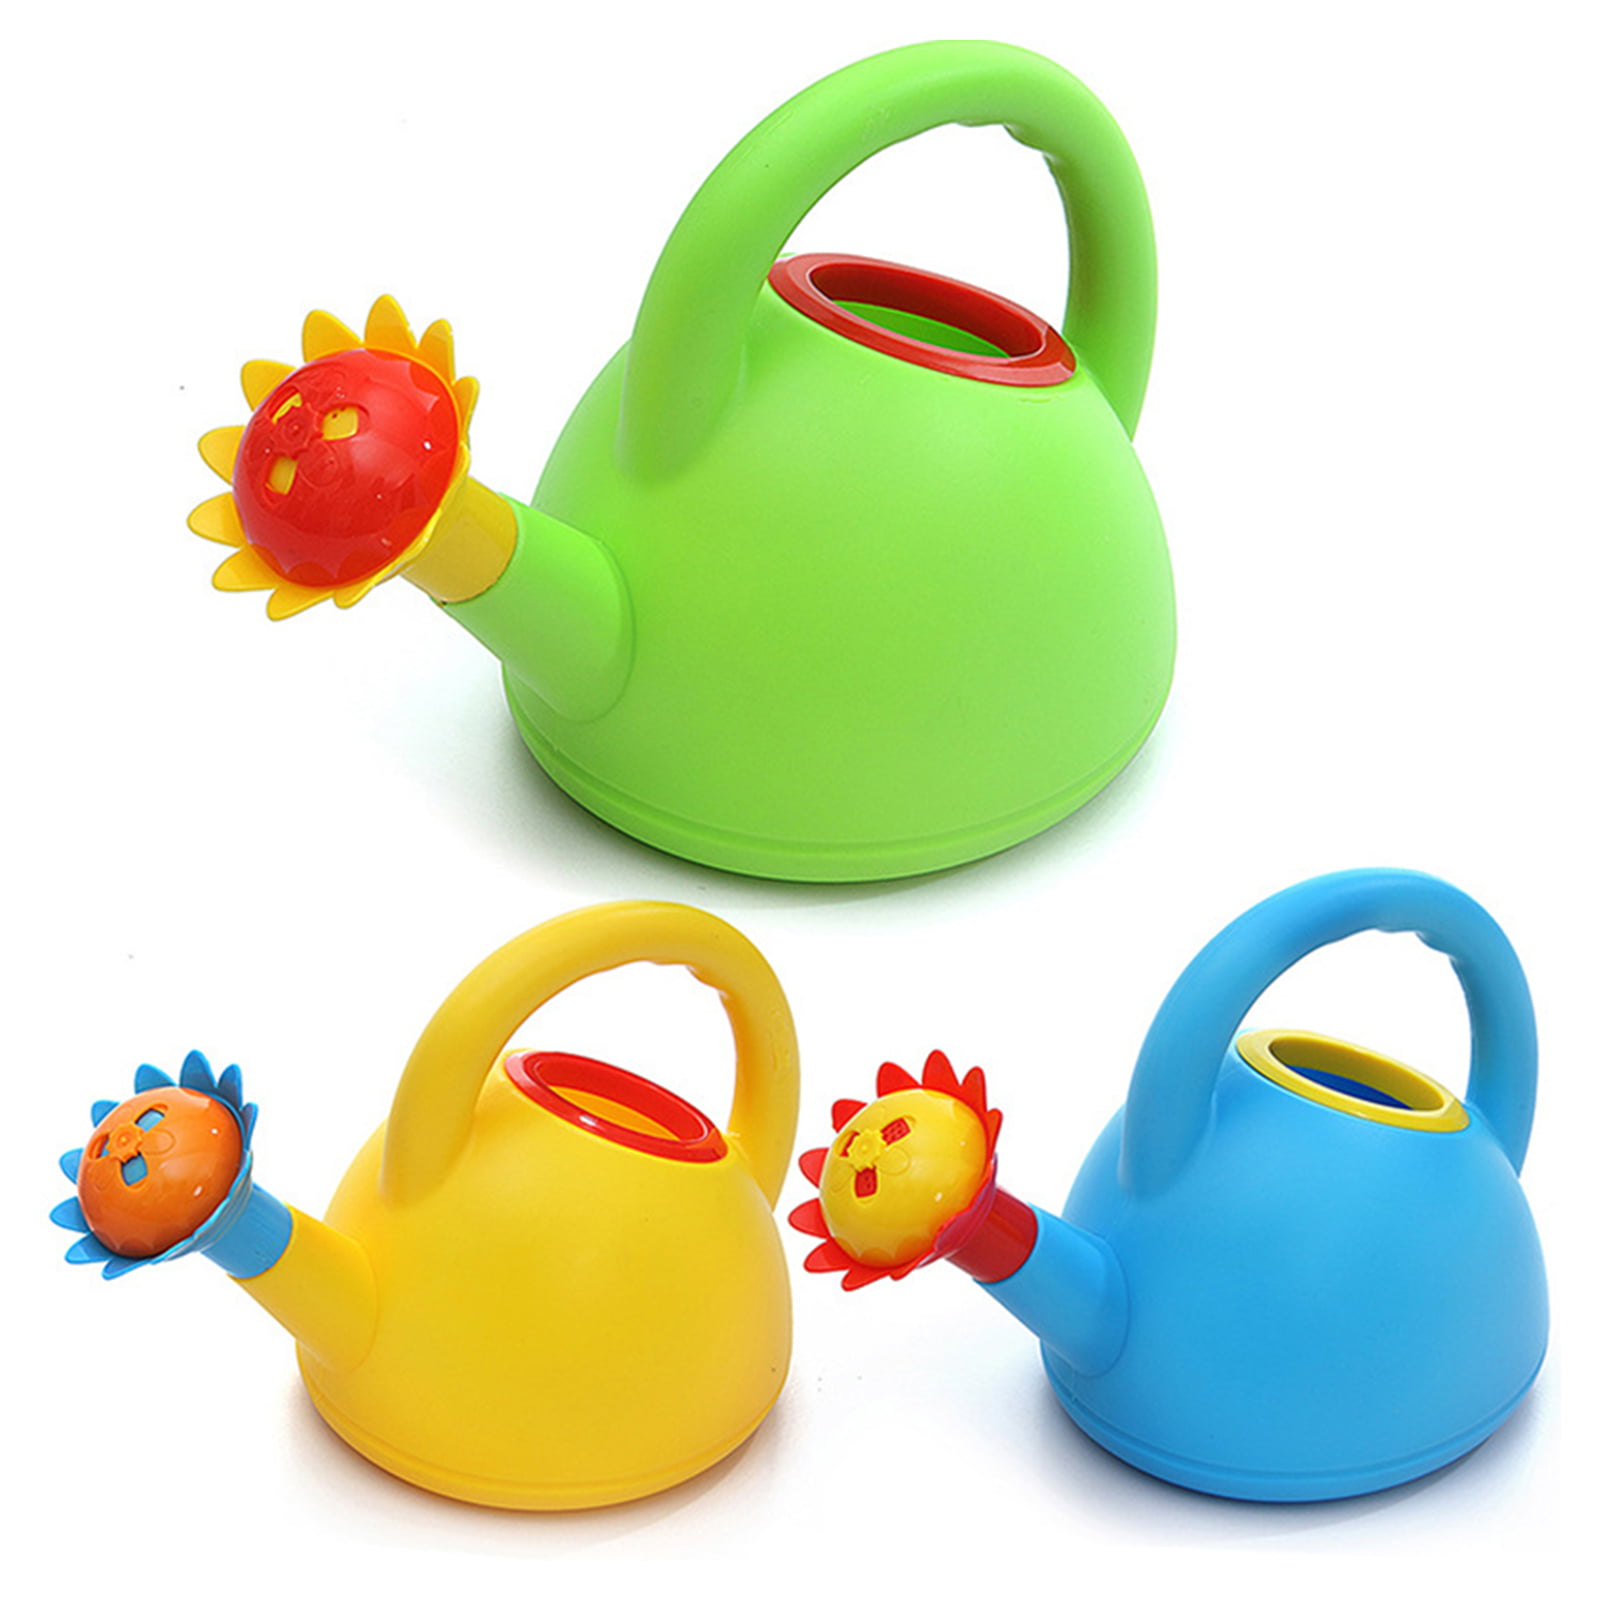 Details about   Kids Children Beach Sand Watering Can Toys Plastic Child Bath Playing Game Fun*